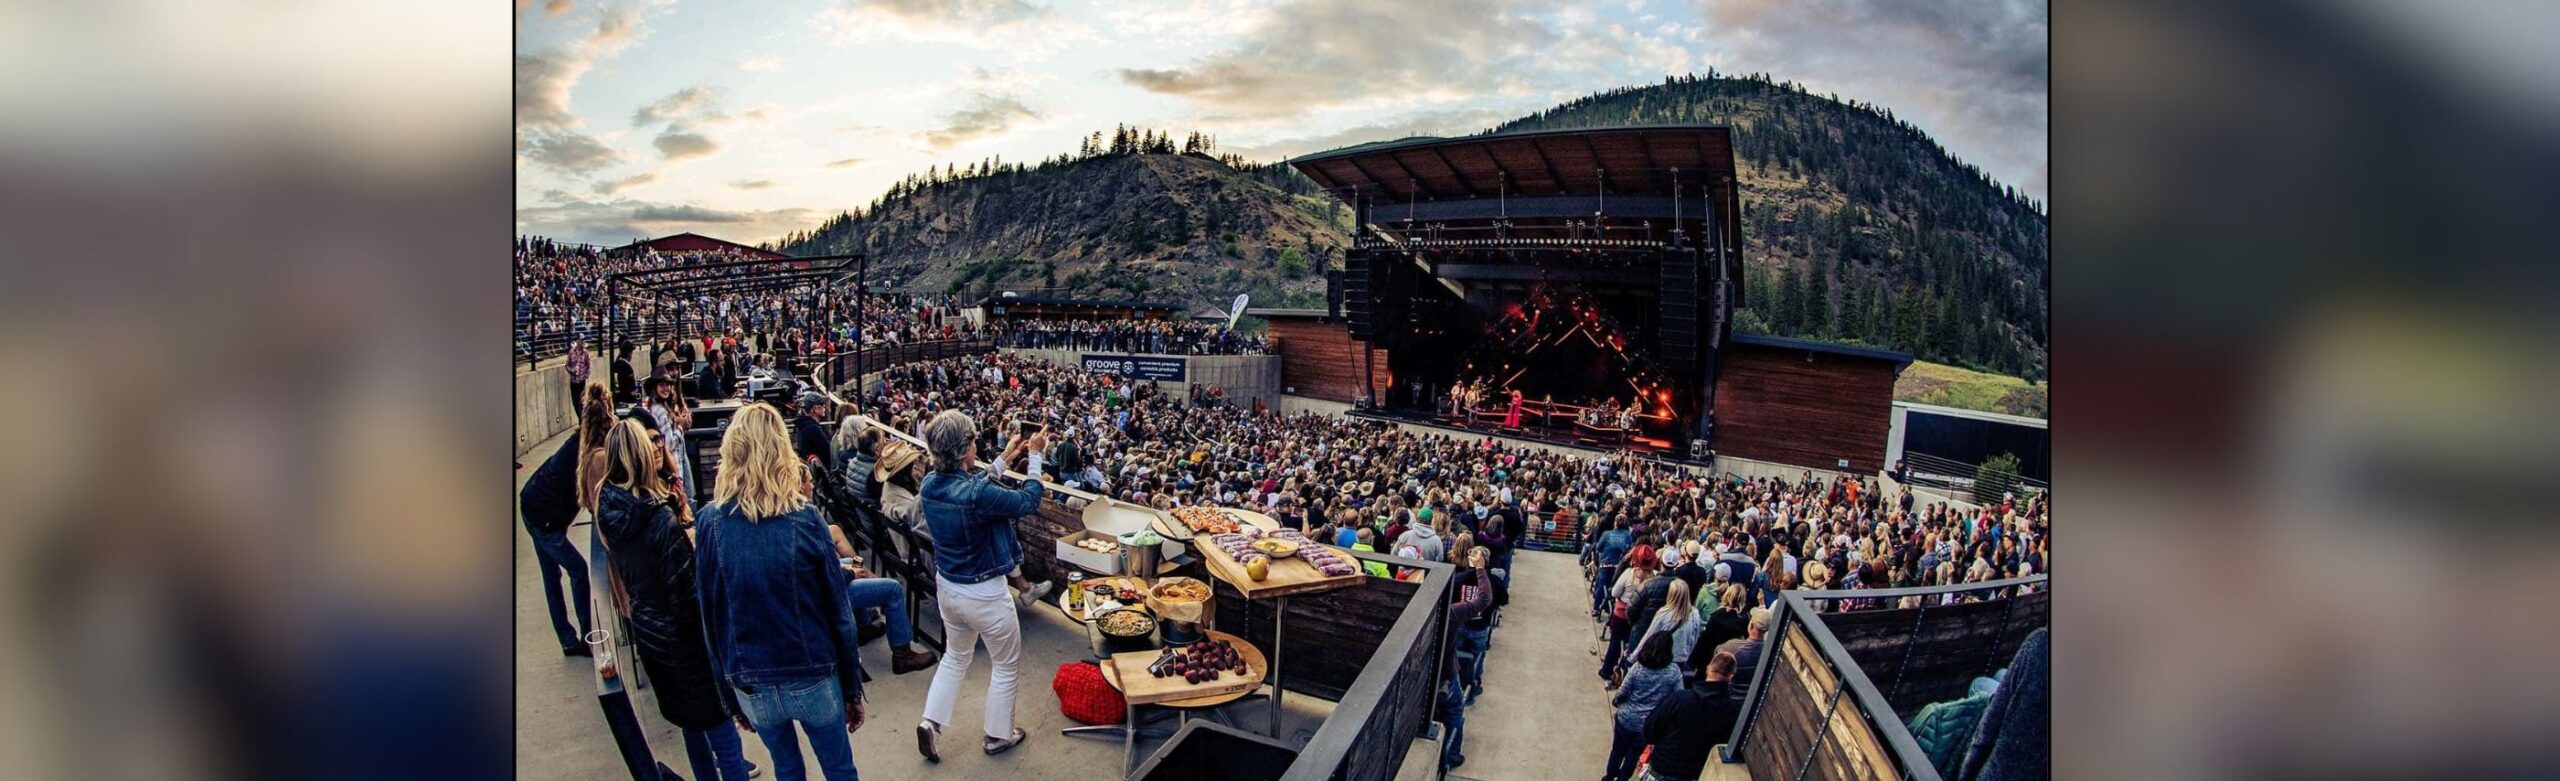 SPECIAL OFFER: Premium Box Released for Old Crow Medicine Show at KettleHouse Amphitheater Image